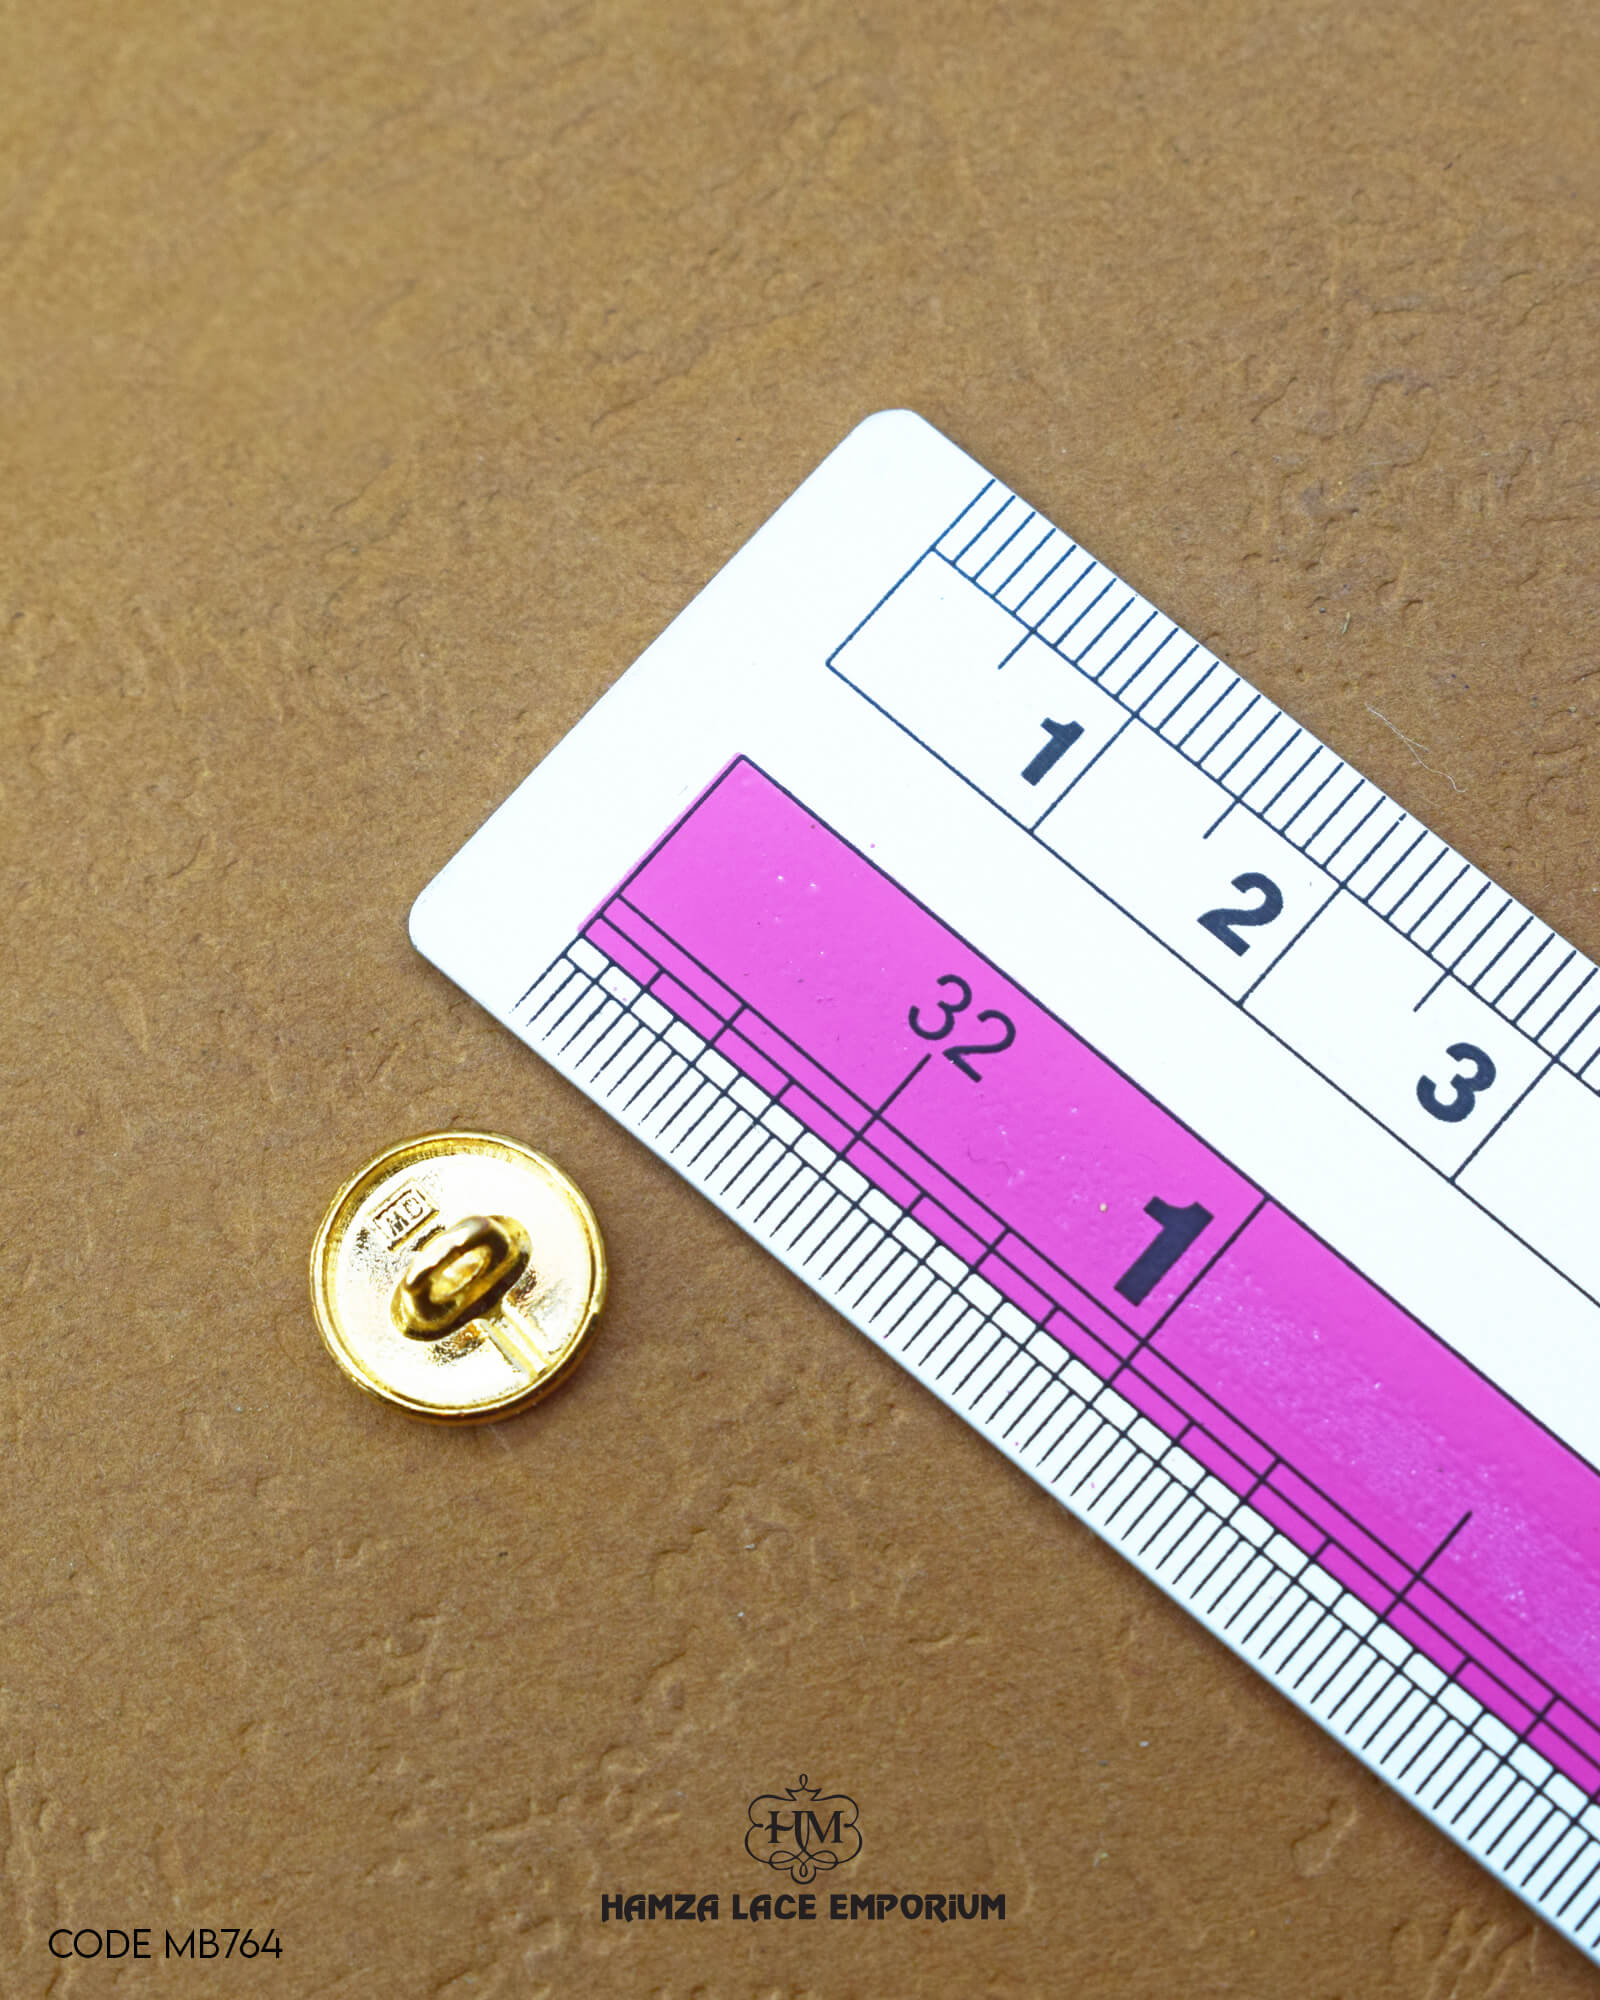 The size of the 'Metal Suiting Button MB754' is measured by using a ruler